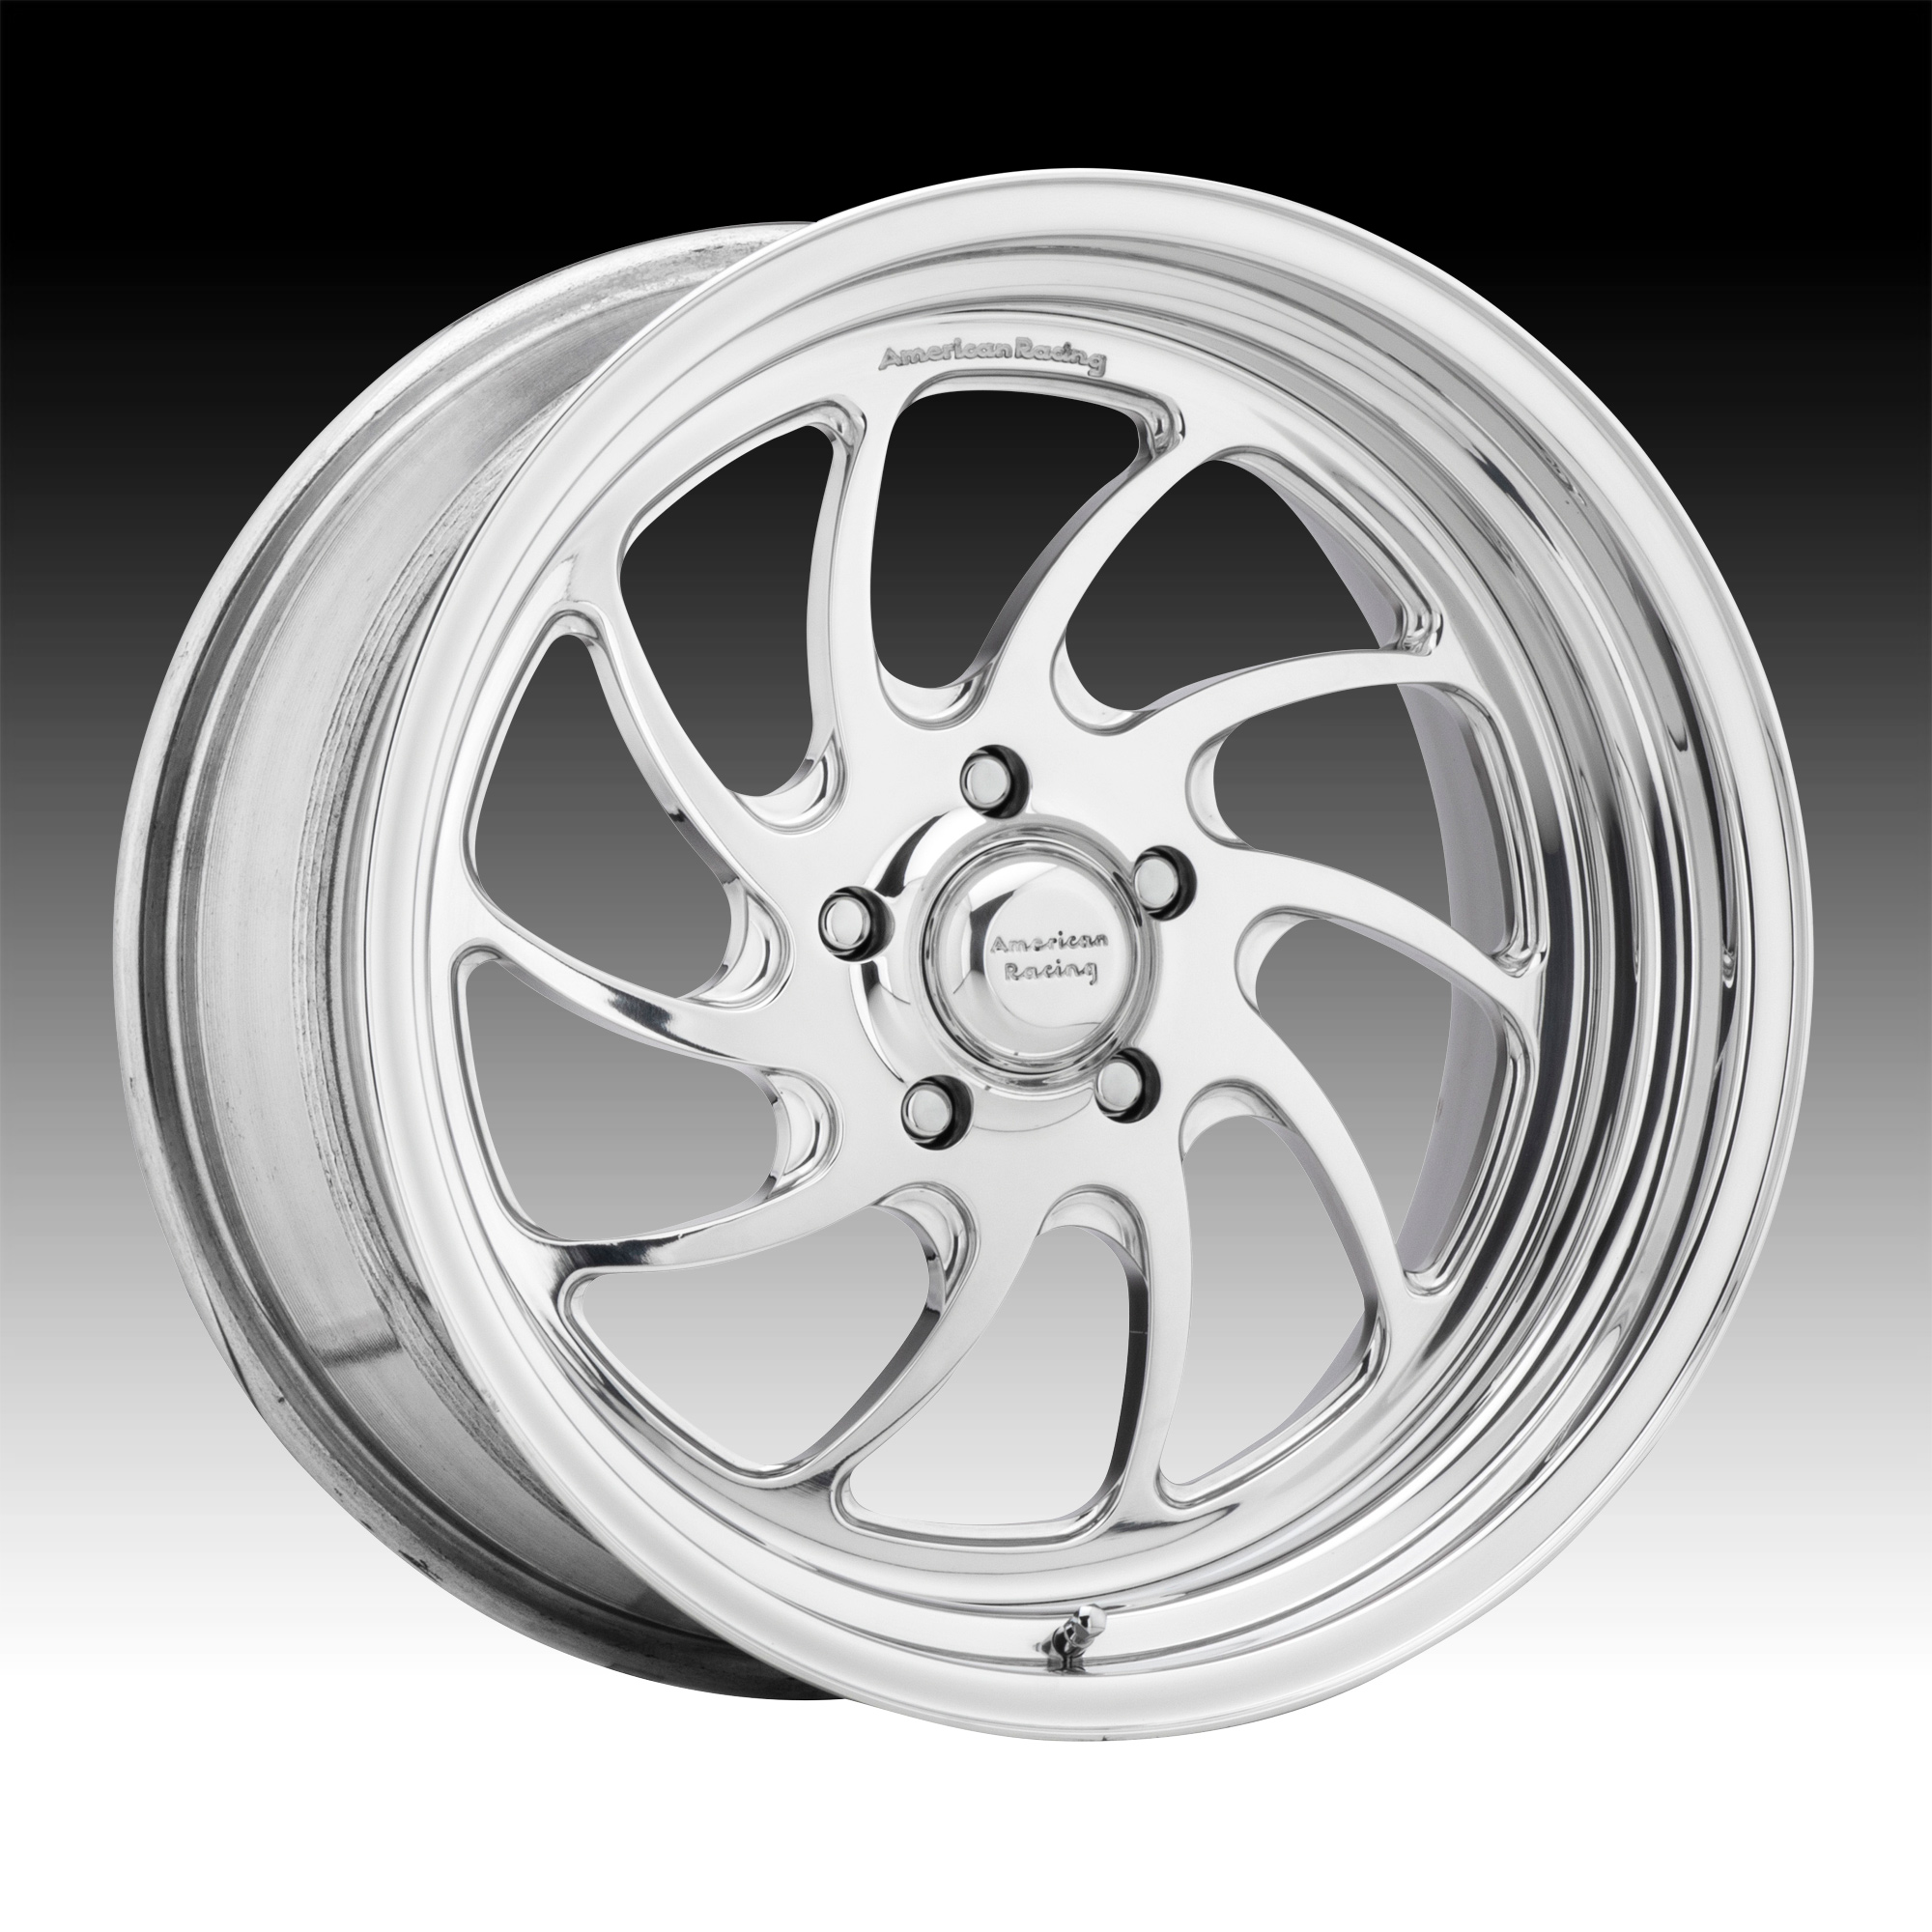 American Racing VF539 Polished Forged Custom Wheels Rims - VF539 - Vintage  Forged 2-PC - Custom Wheels for Trucks, Jeeps, SUVs and Passenger Cars